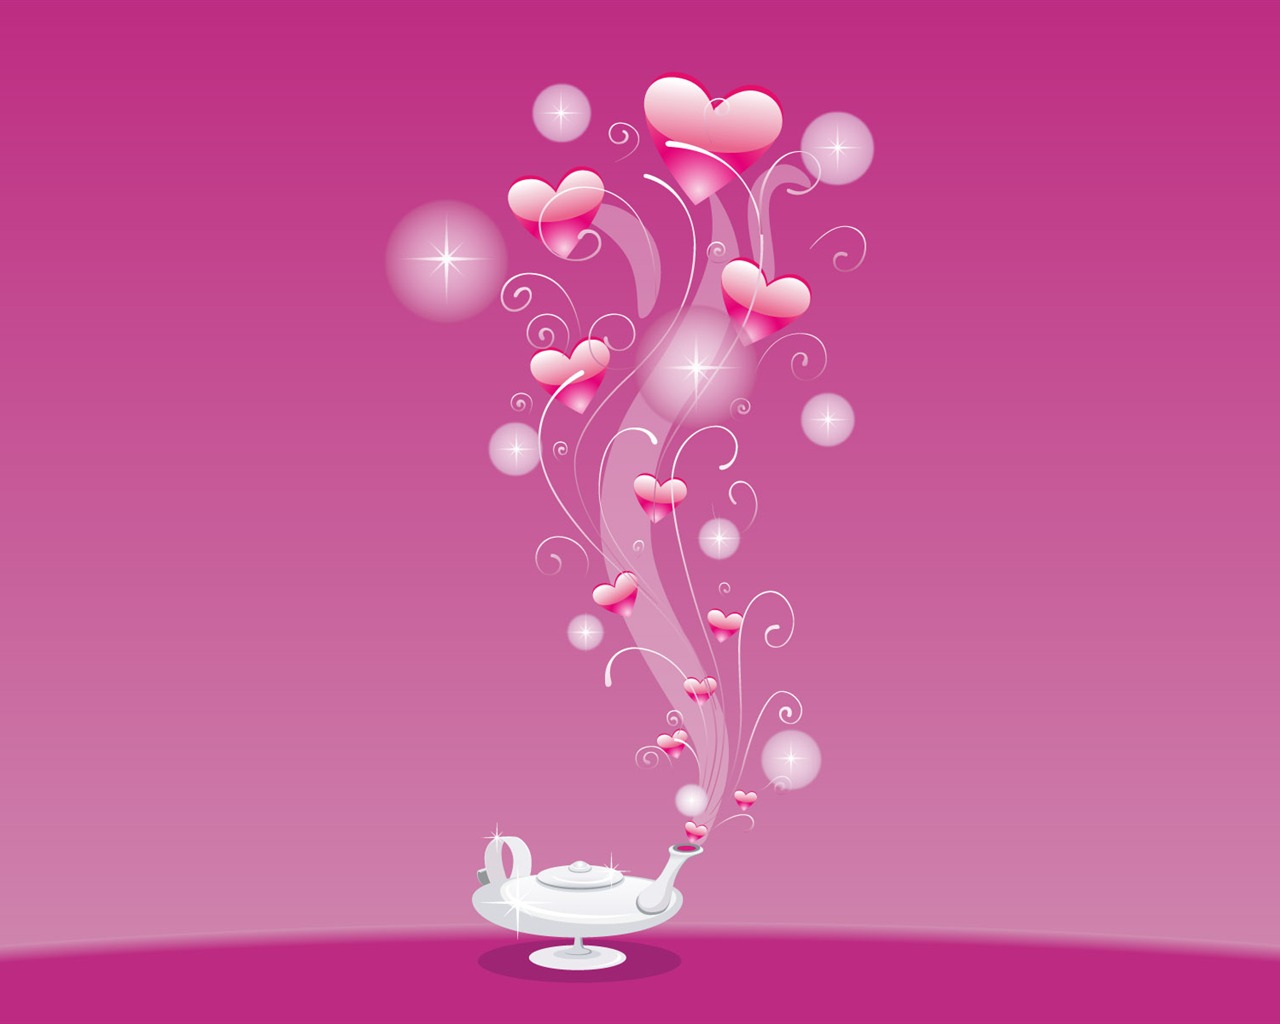 Valentine's Day Love Theme Wallpapers #10 - 1280x1024